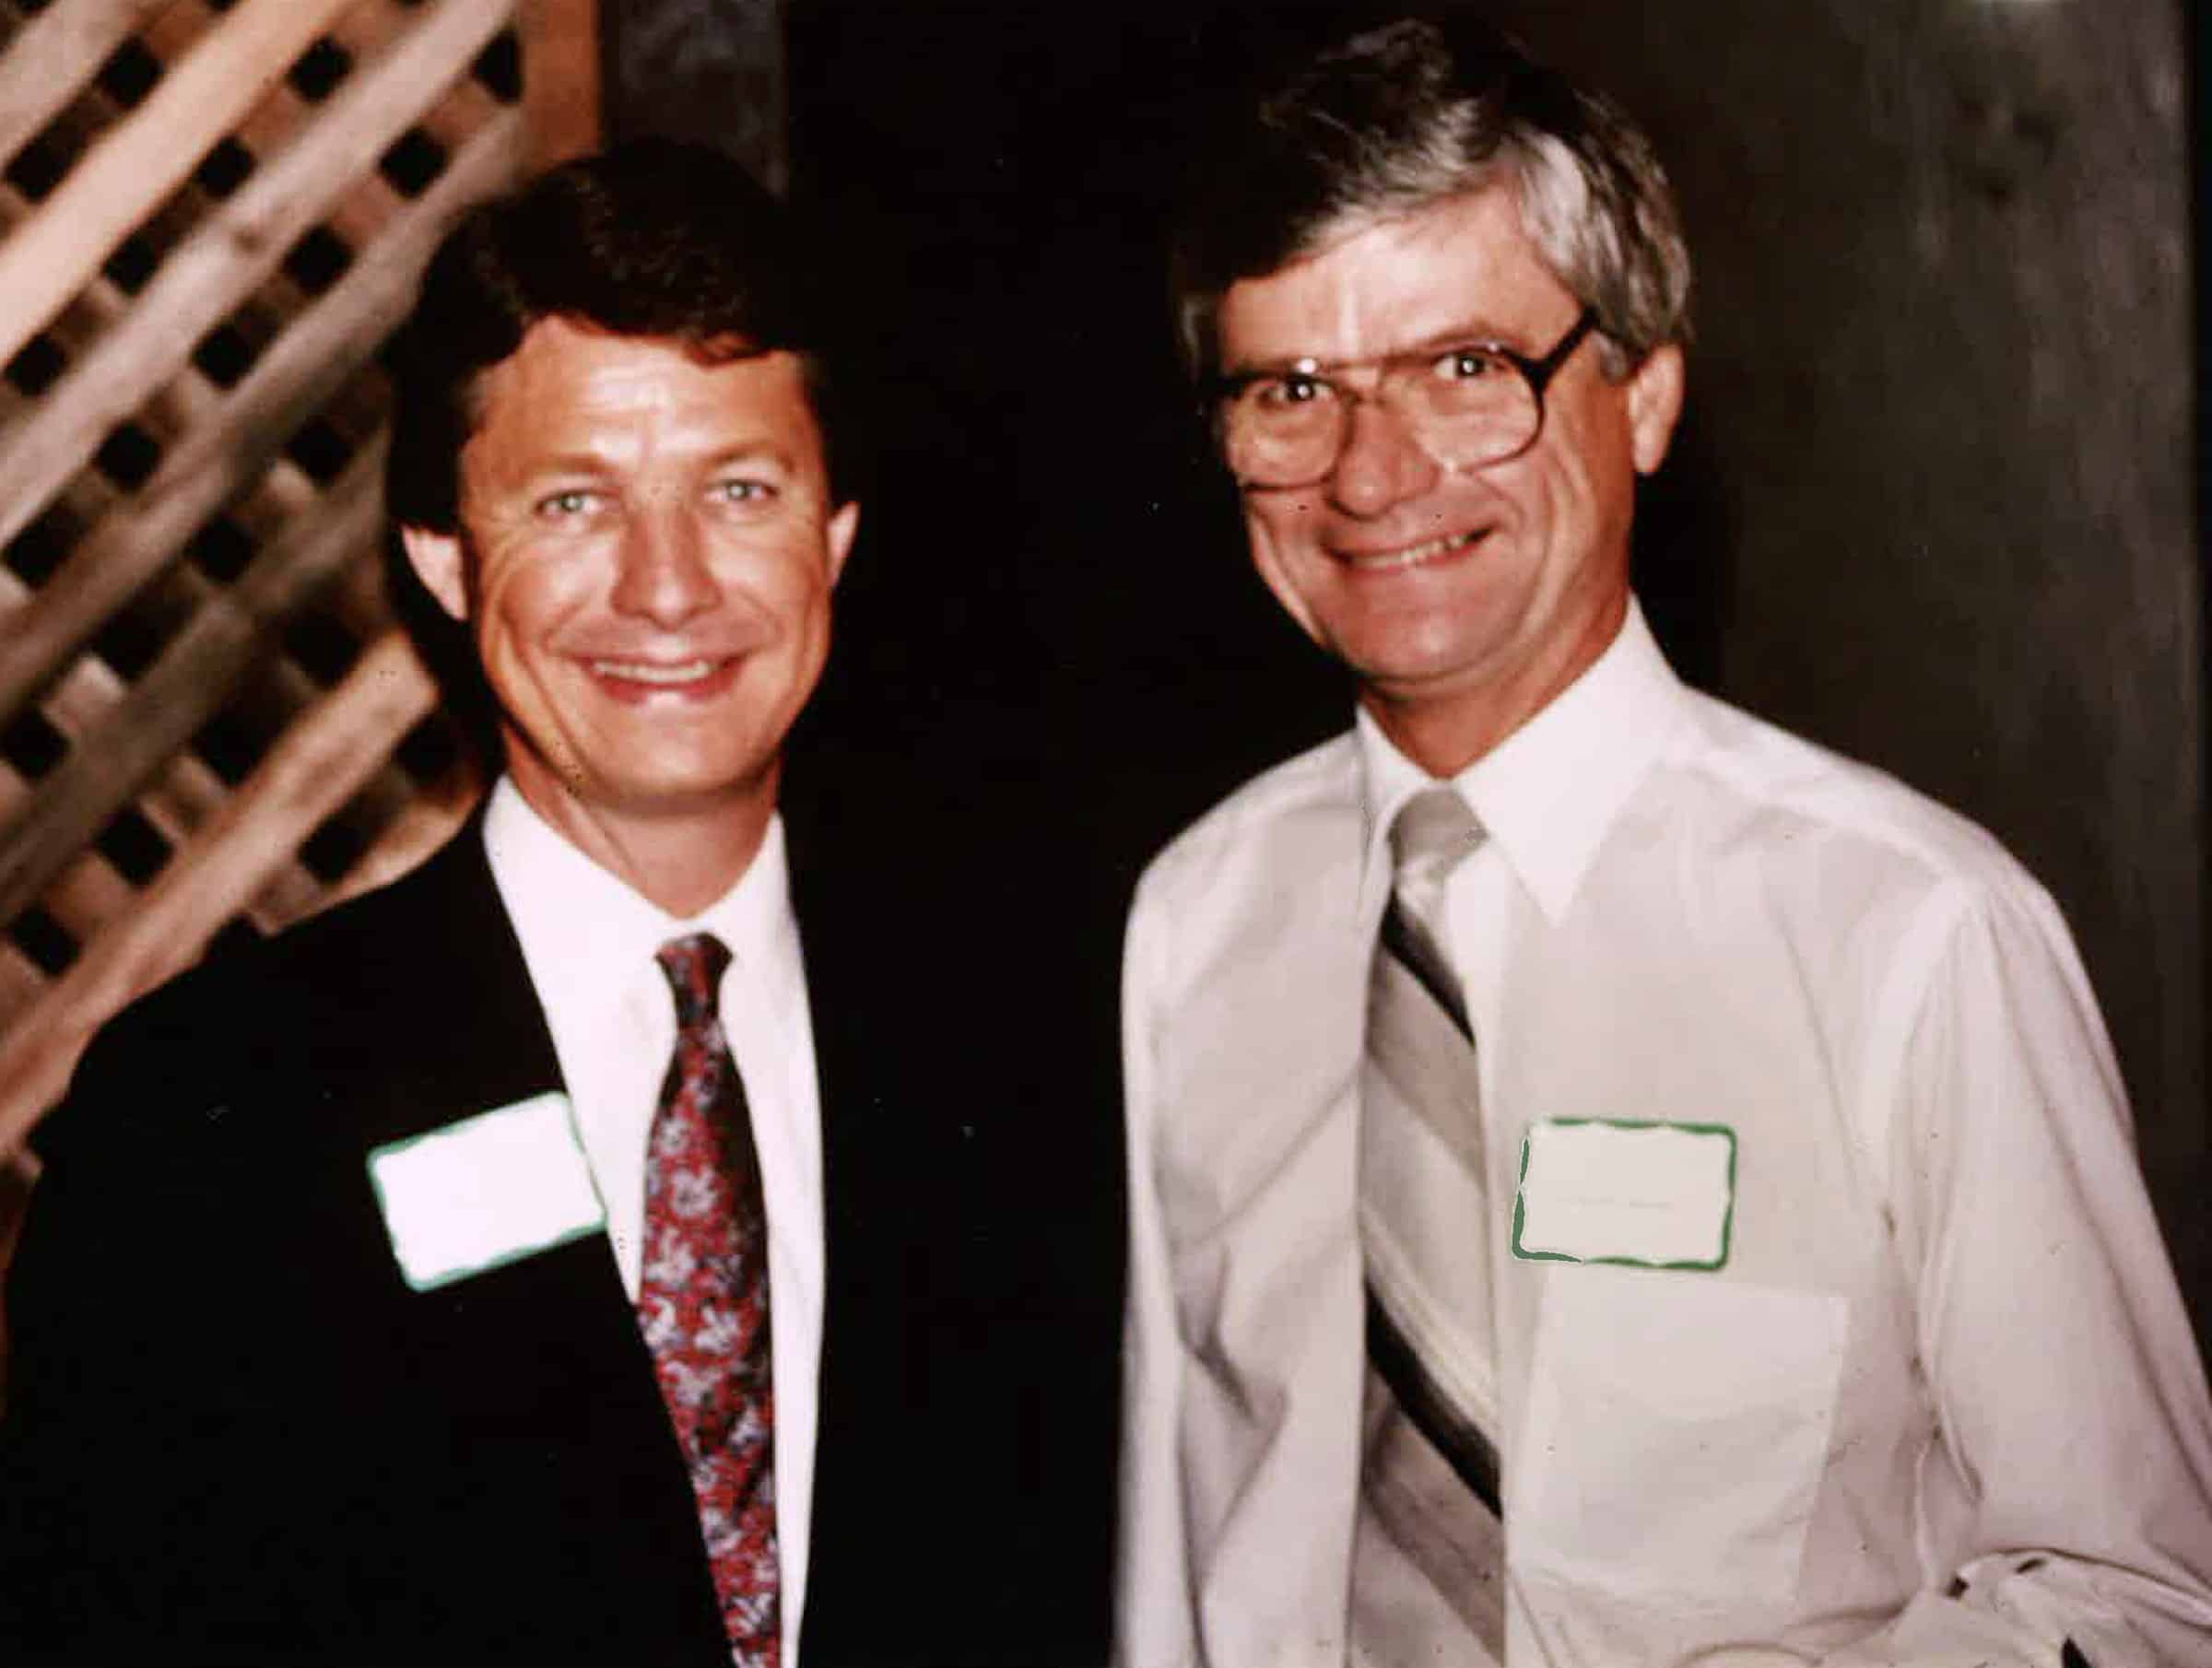 Michael and Bill McCulloch, founders of Pet Partners.